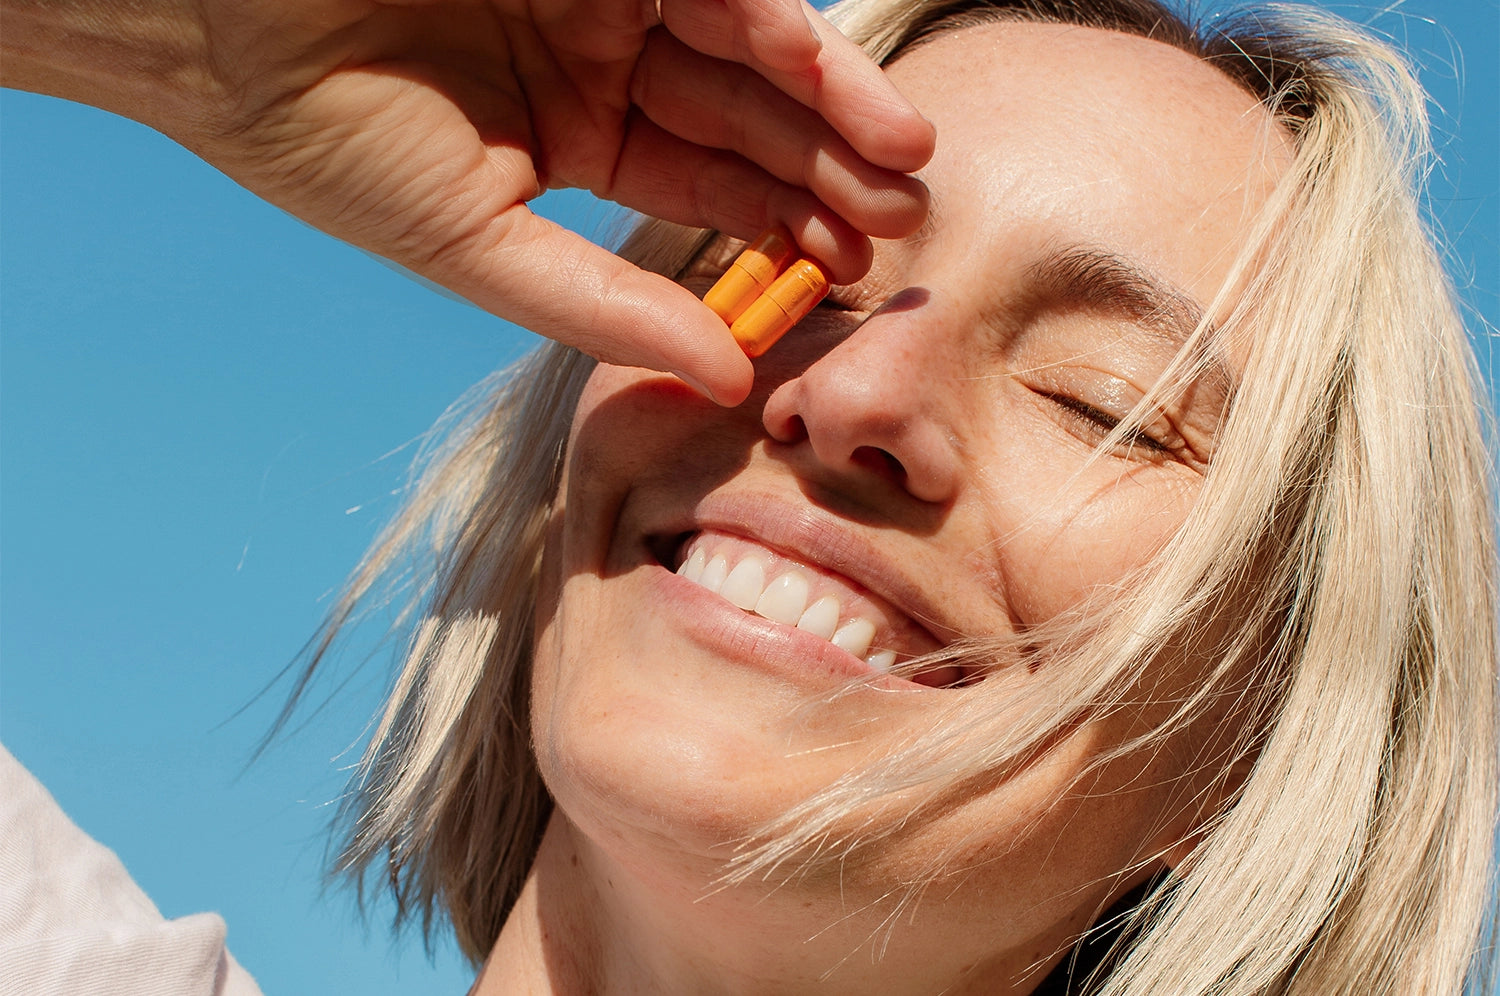 A smiling woman with short blonde hair holding two THE FULLEST Kinder Thoughts saffron and turmeric capsules against her face.